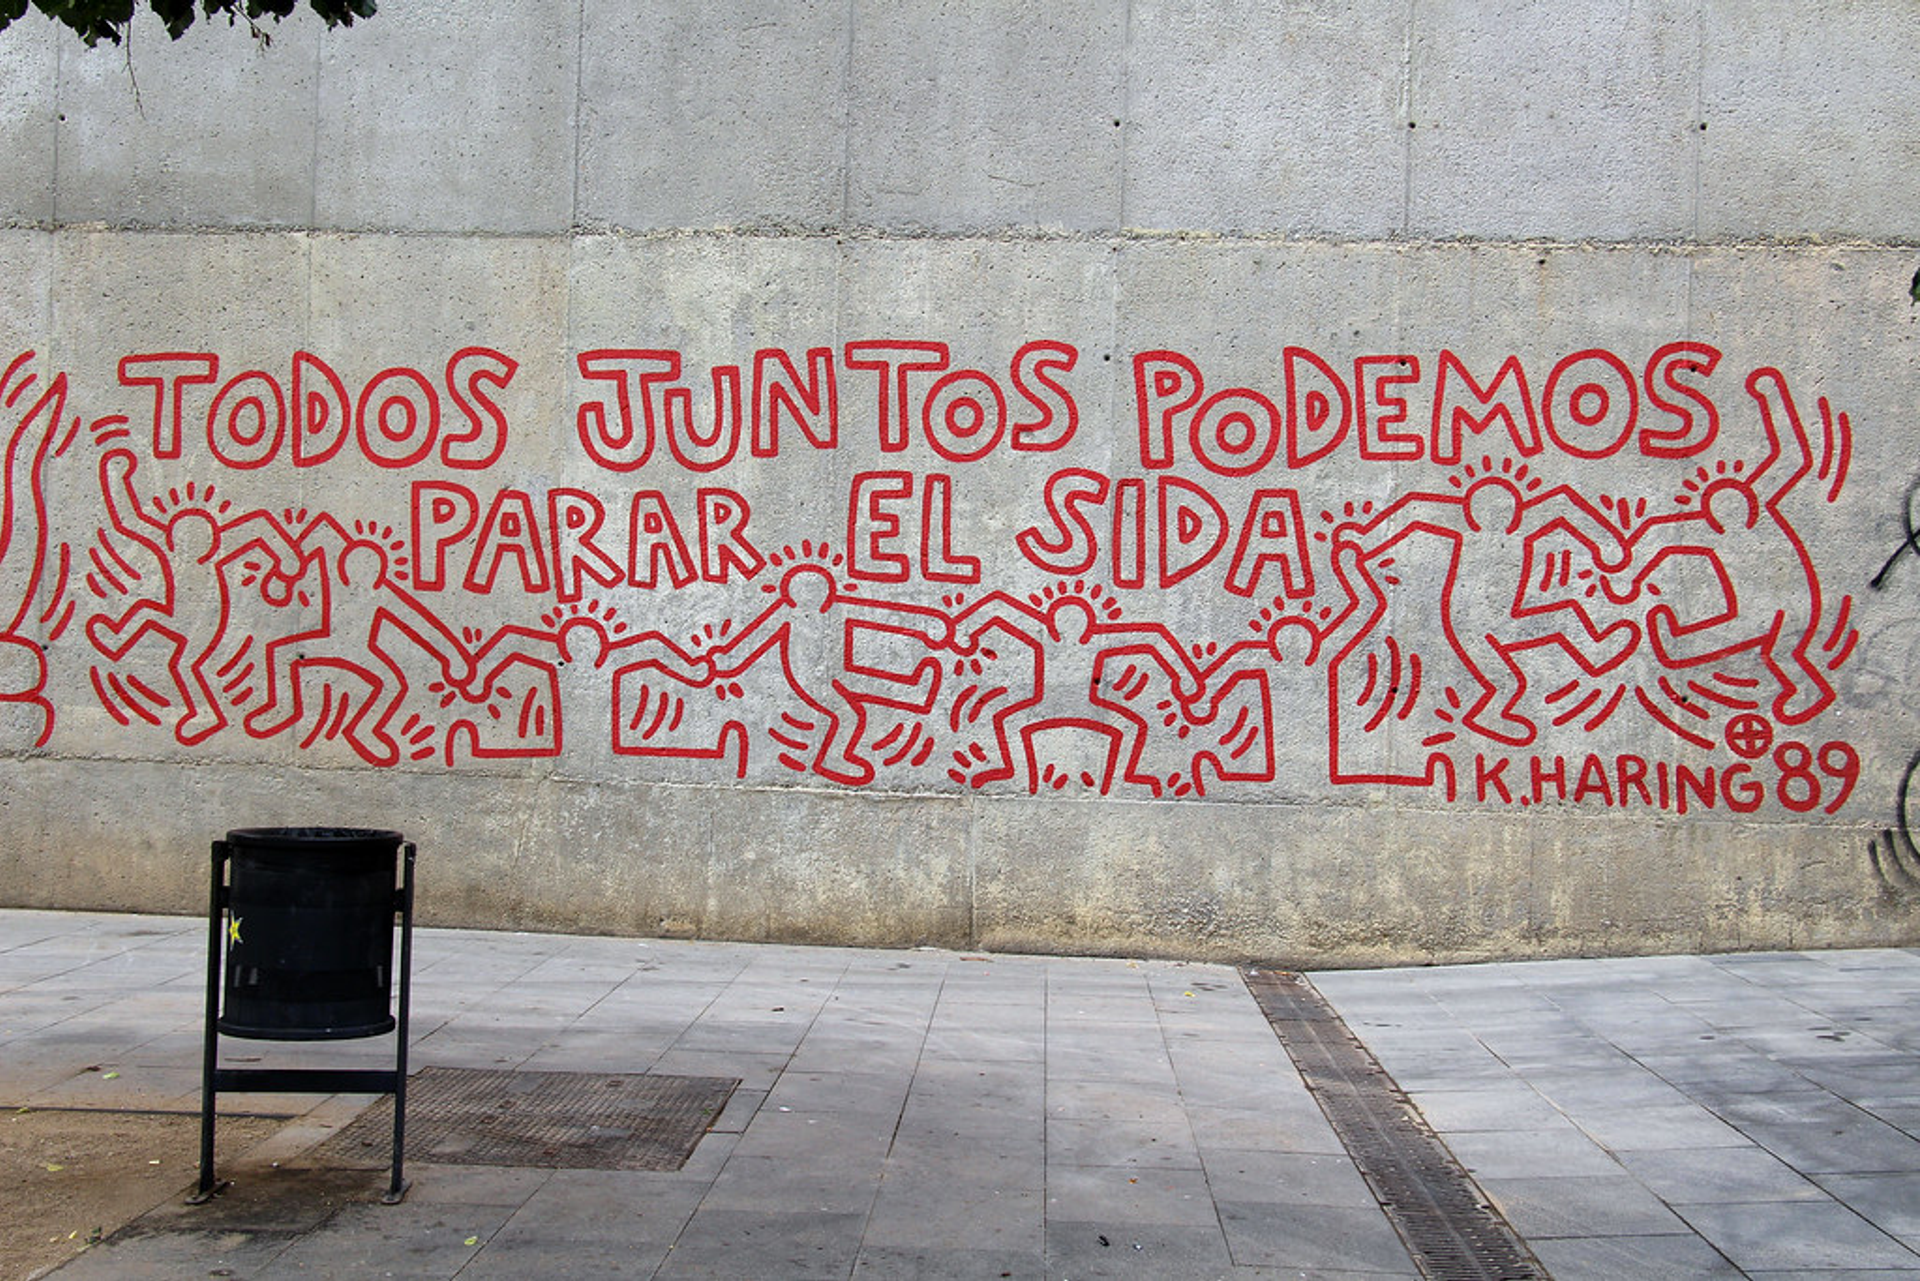 An image of a mural by Keith Haring in Barcelona, Spain. Done in red, it shows his signature interlaced dancing men, around a line of text that says "Together we can stop AIDS" in Spanish.